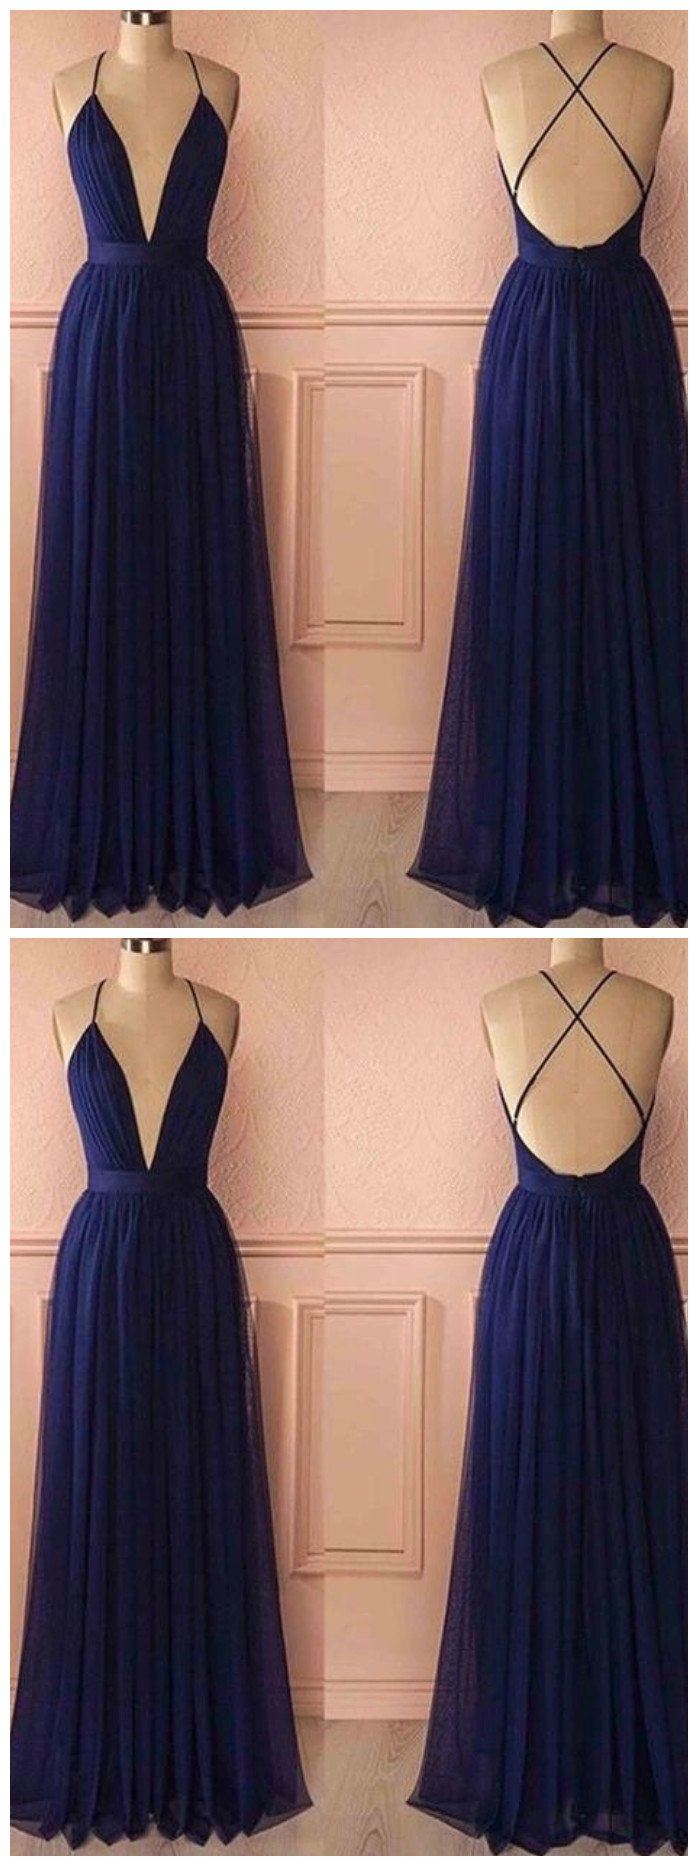 Sassy Wedding Sexy Backless Chiffon Navy Evening Dress, Long Party Gown